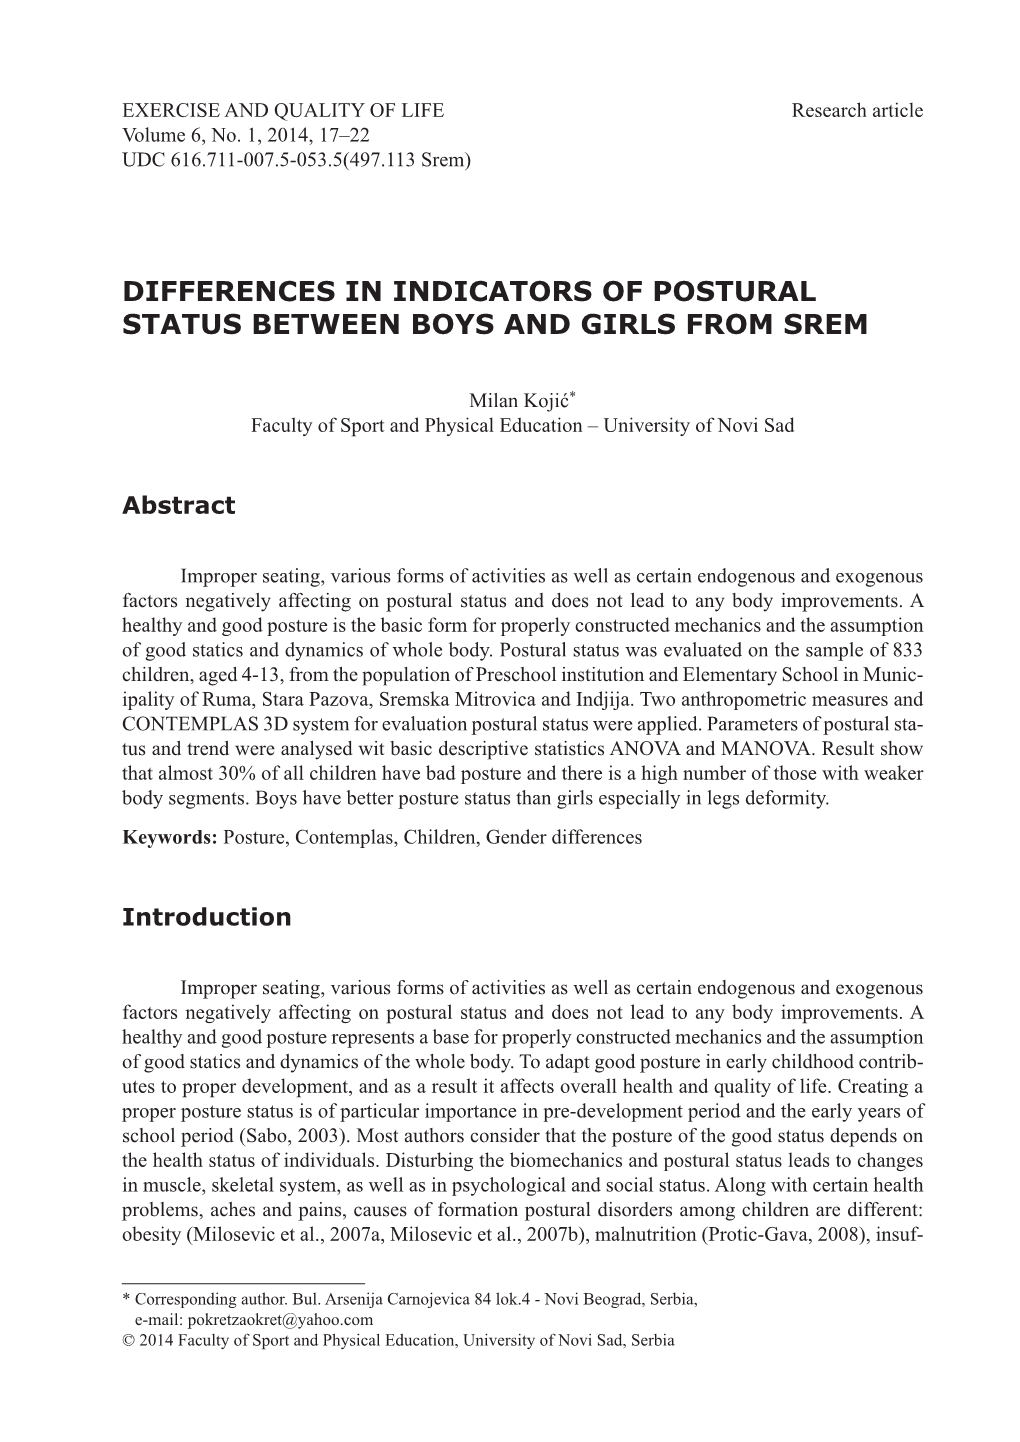 Differences in Indicators of Postural Status Between Boys and Girls from Srem